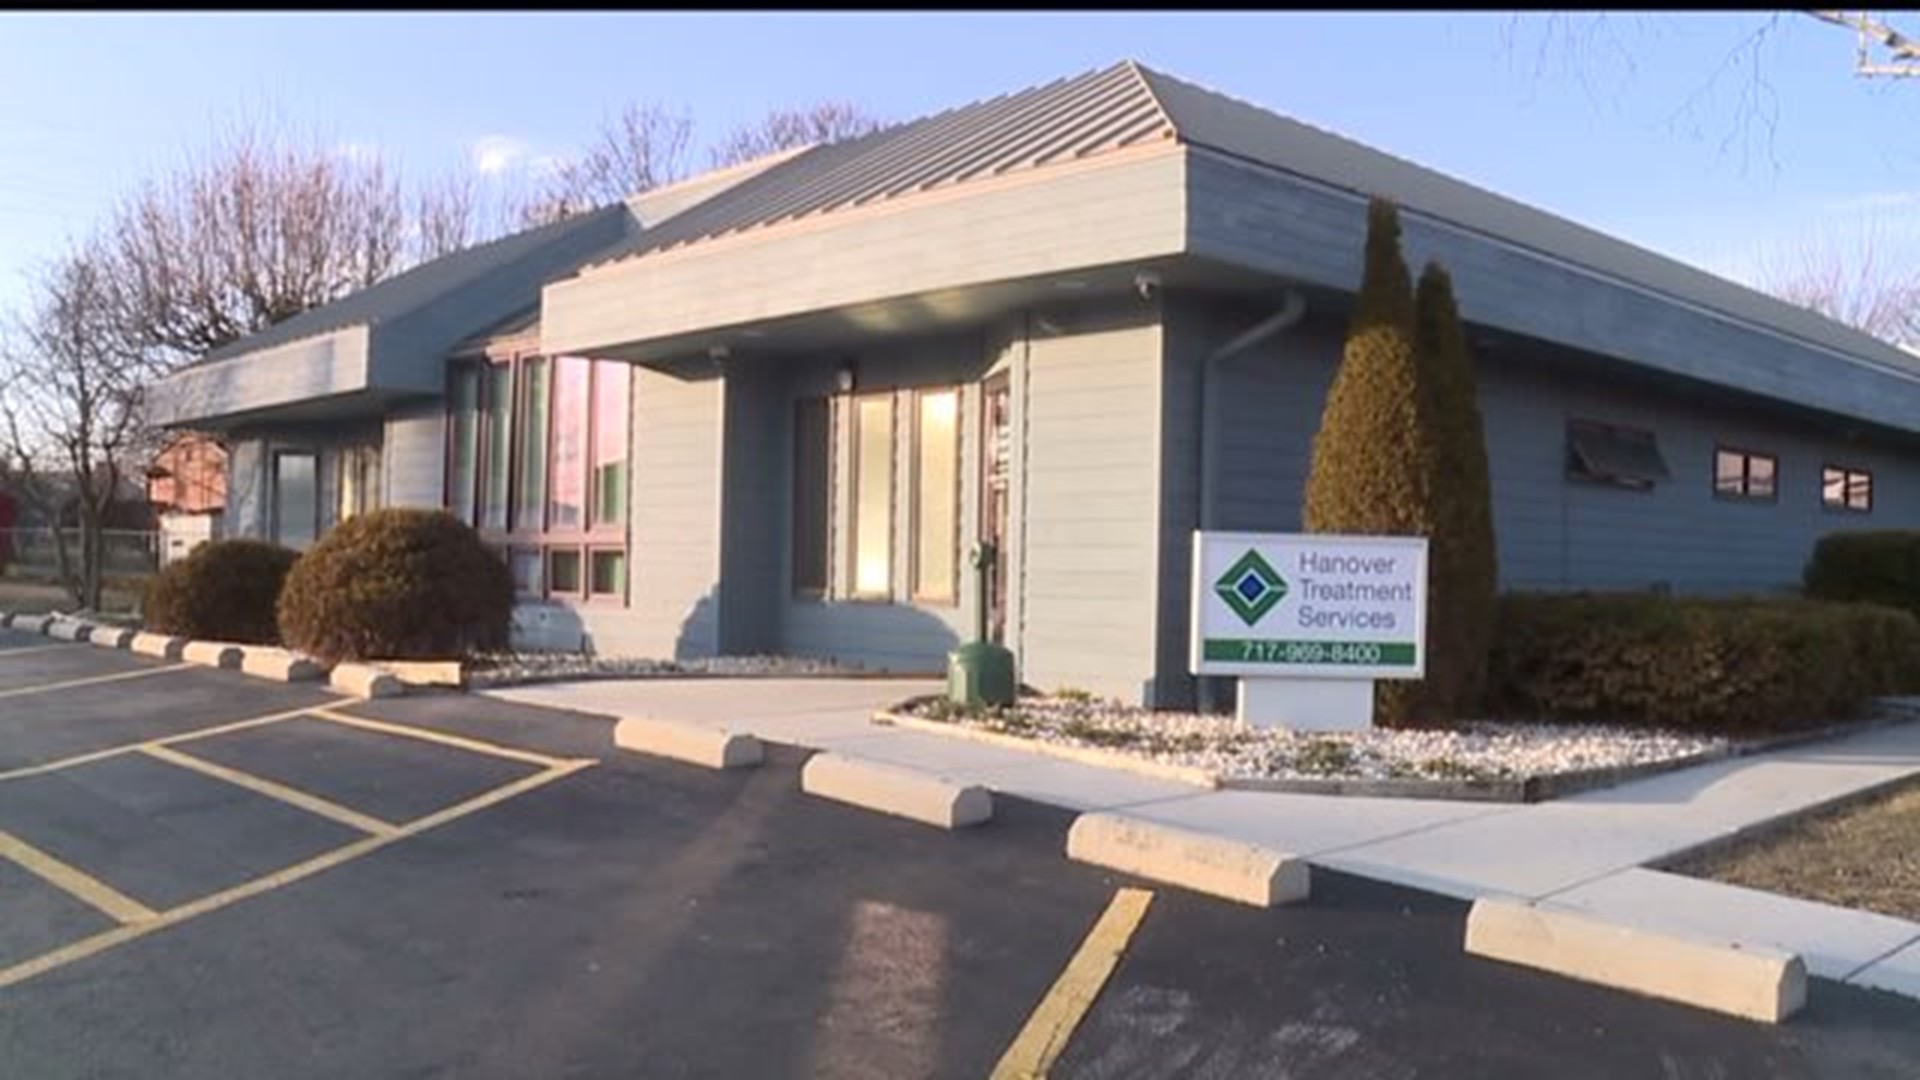 York County facility specializes in Methadone treatment for opiate addictions